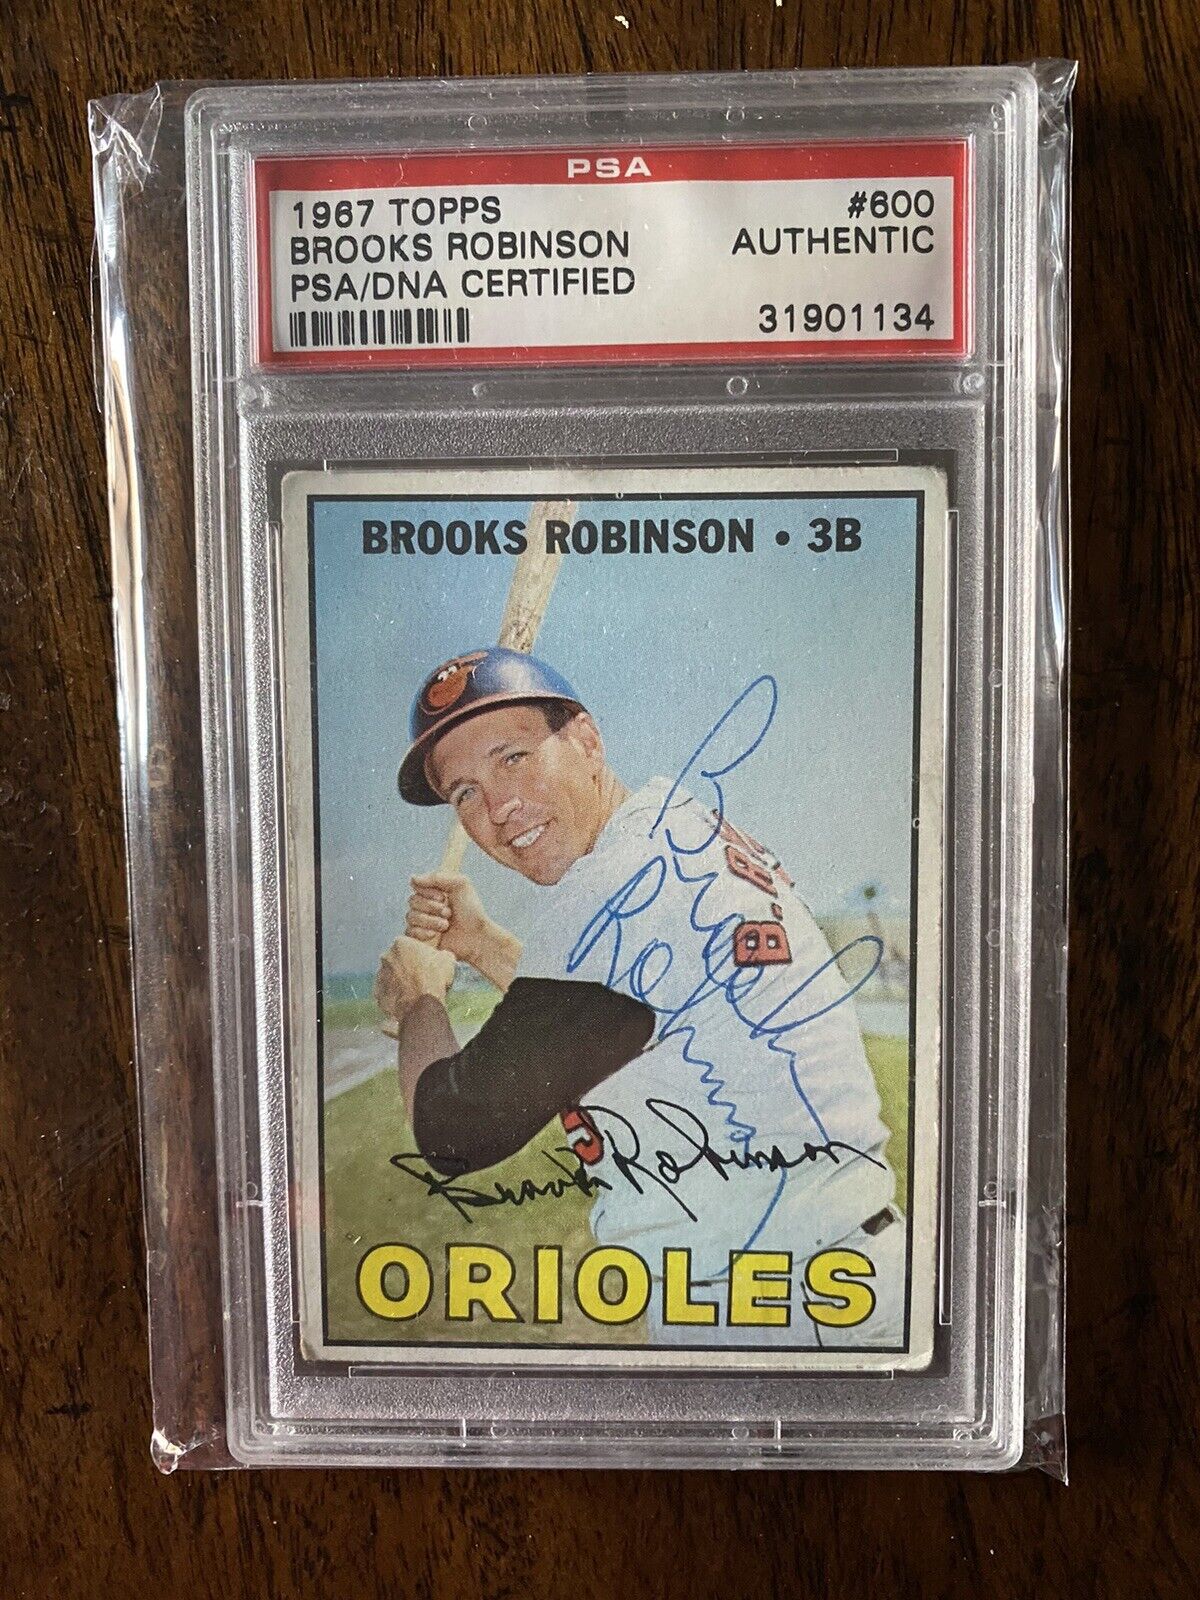 1967 TOPPS BROOKS ROBINSON PSA CERTIFIED HIGH NUMBER RARE SIGNED CARD ORIOLES SP